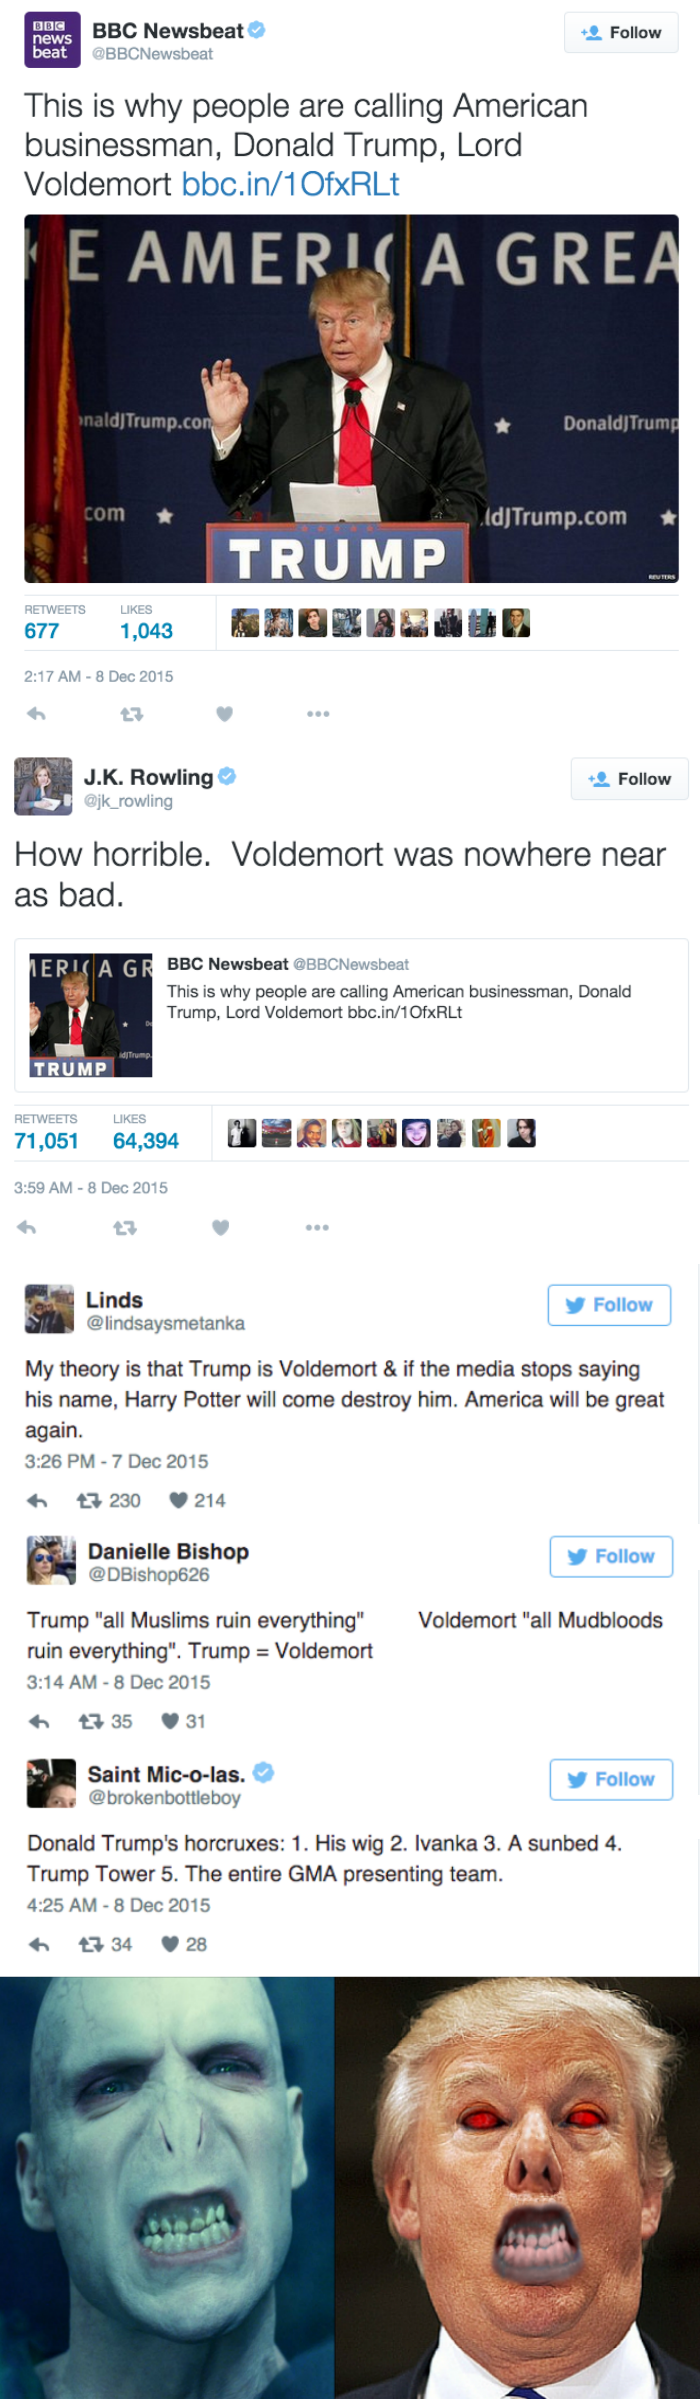 funny twitter image JK Rowling doesn't think Voldemort is as evil as Donald Trump